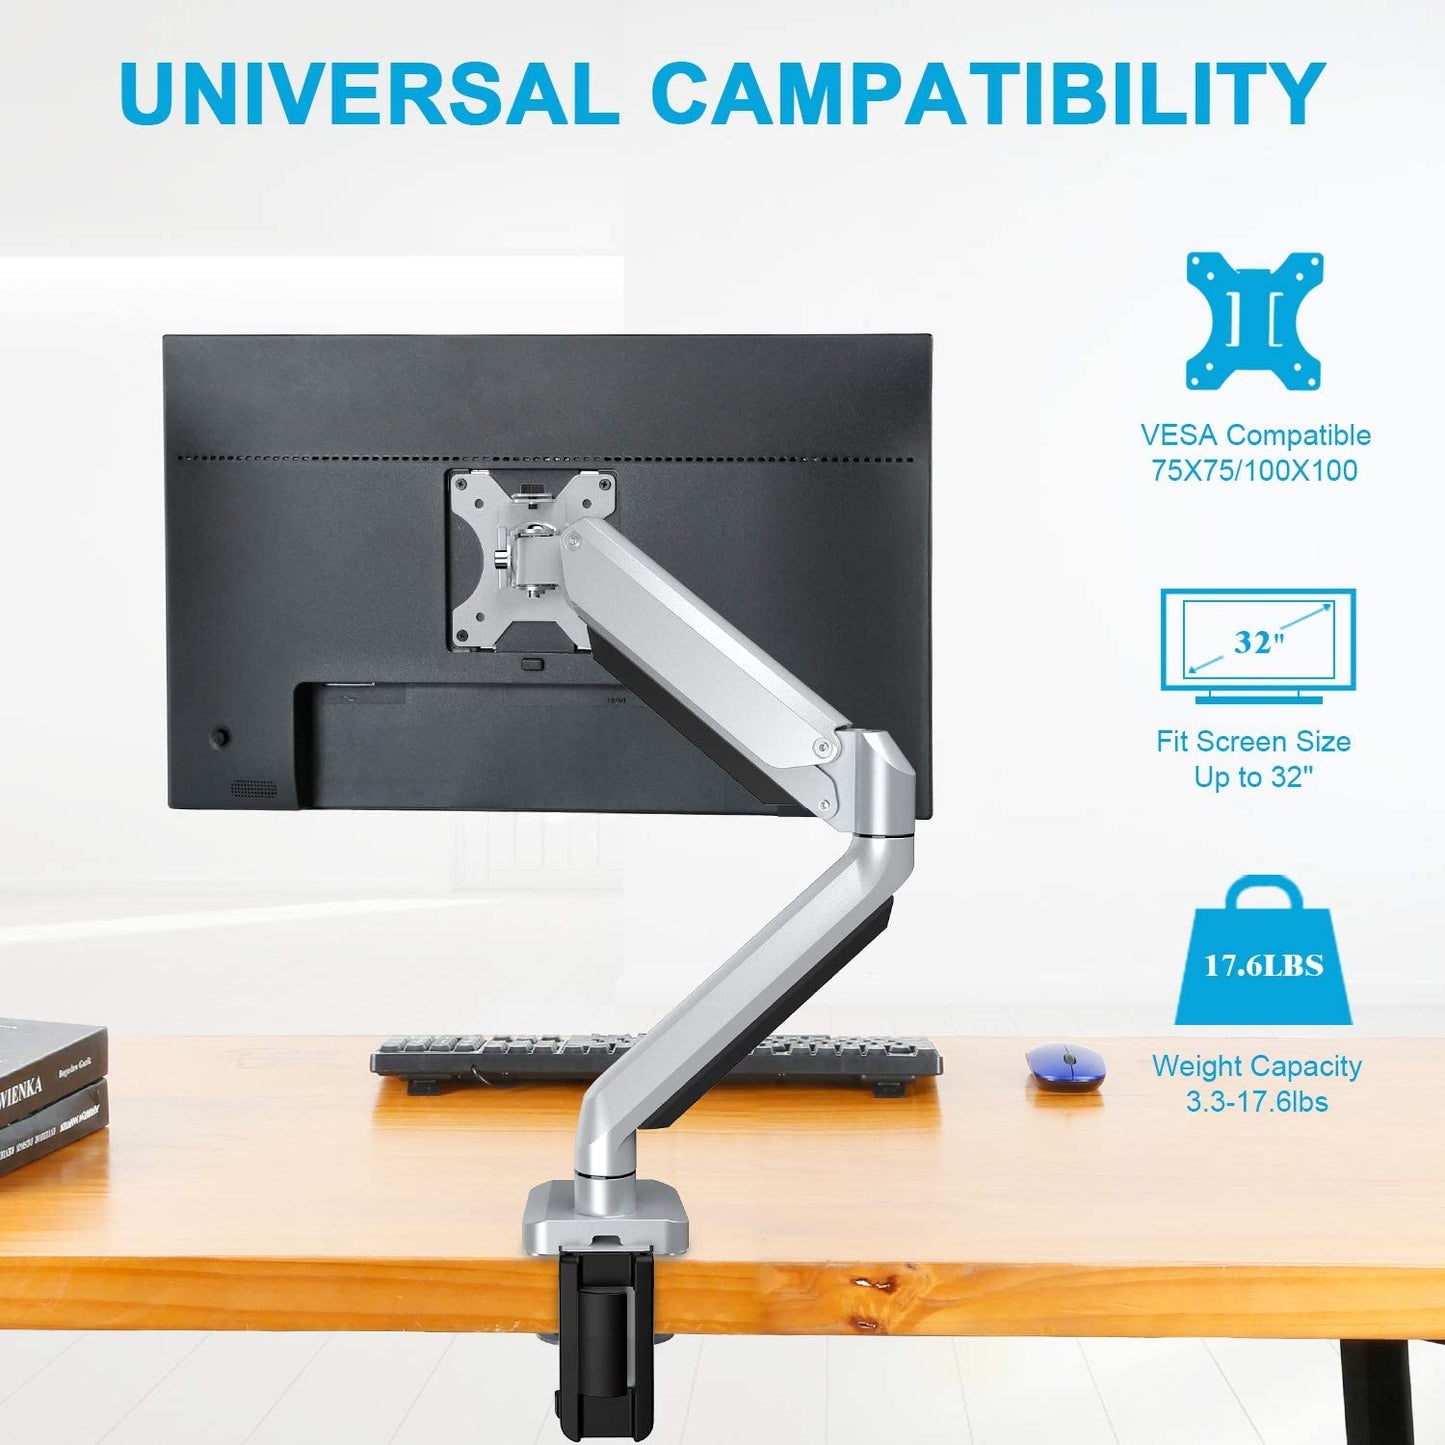 Single Arm universal monitor arm mount for screen up to 32 inch